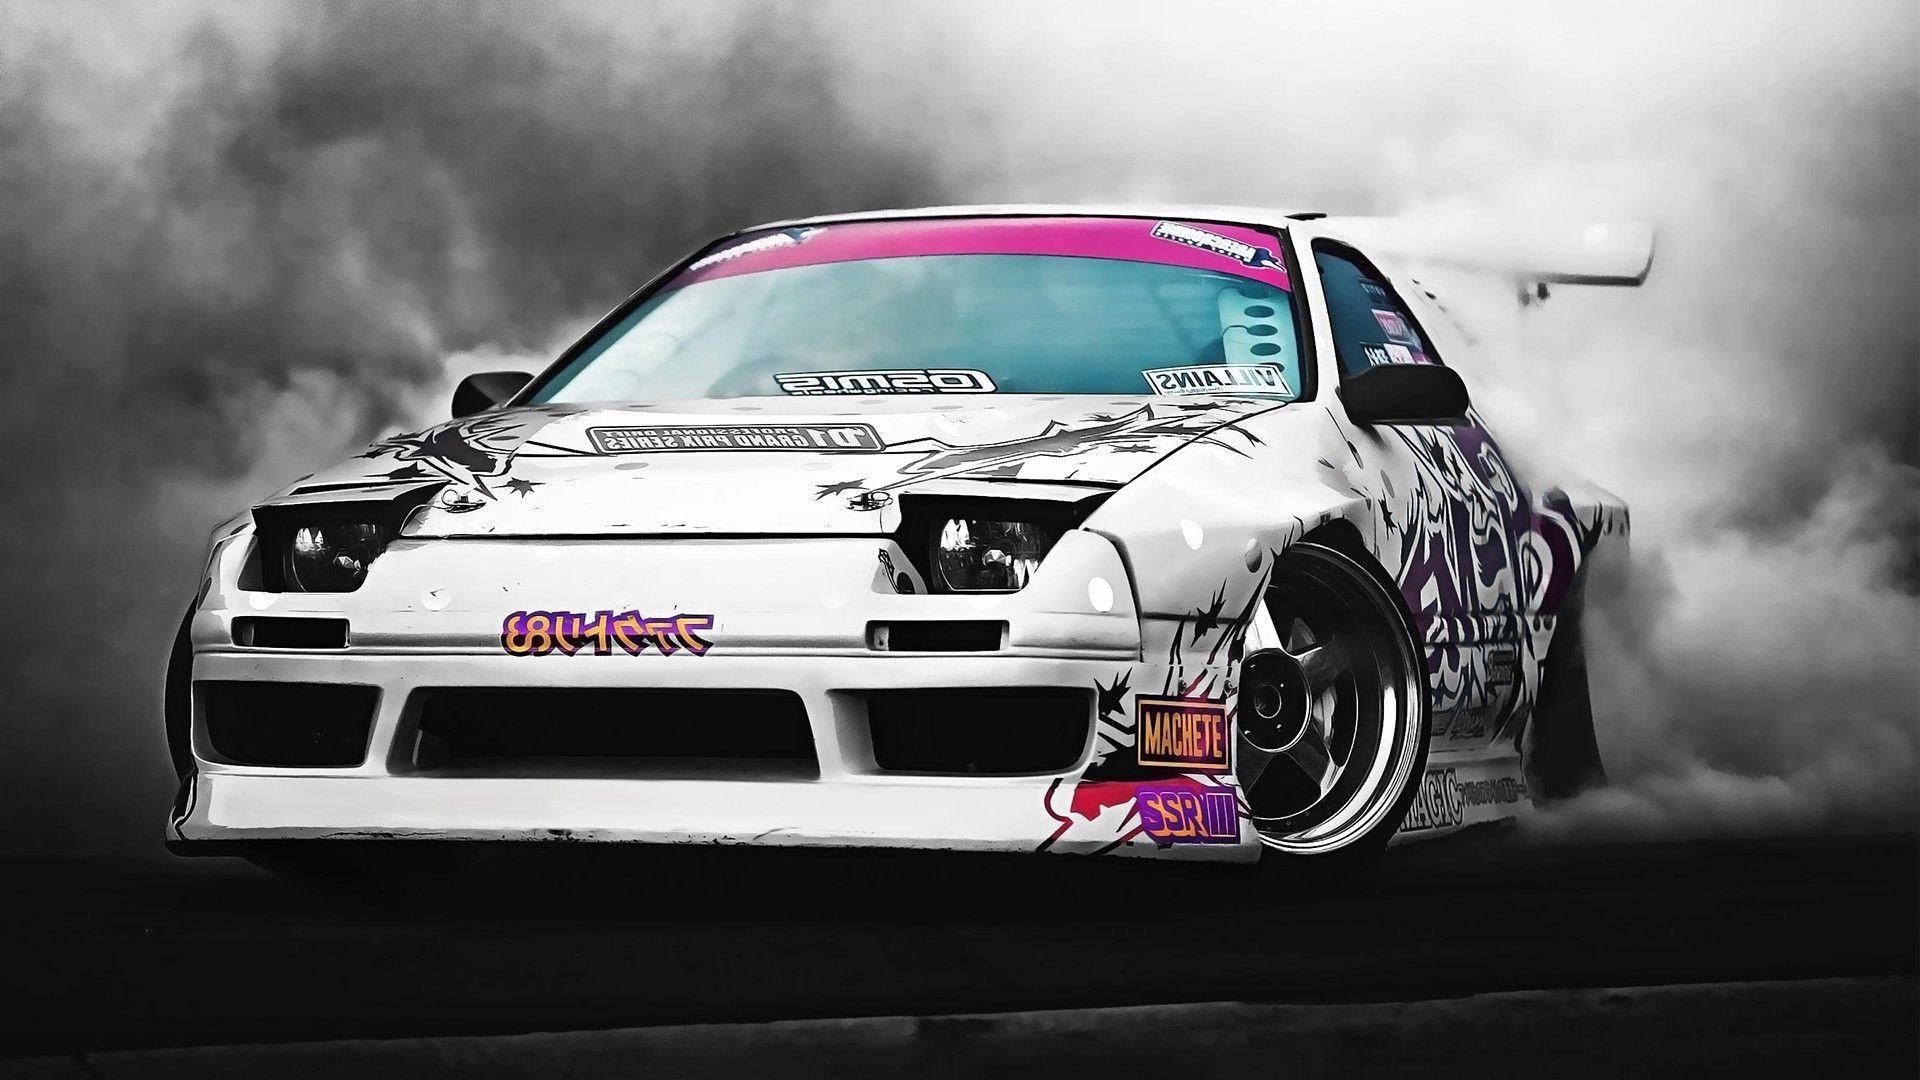 Wallpaper car, auto, Wallpaper, tuning, skid, drift, drift, car for mobile  and desktop, section mazda, resolution 1920x1280 - download